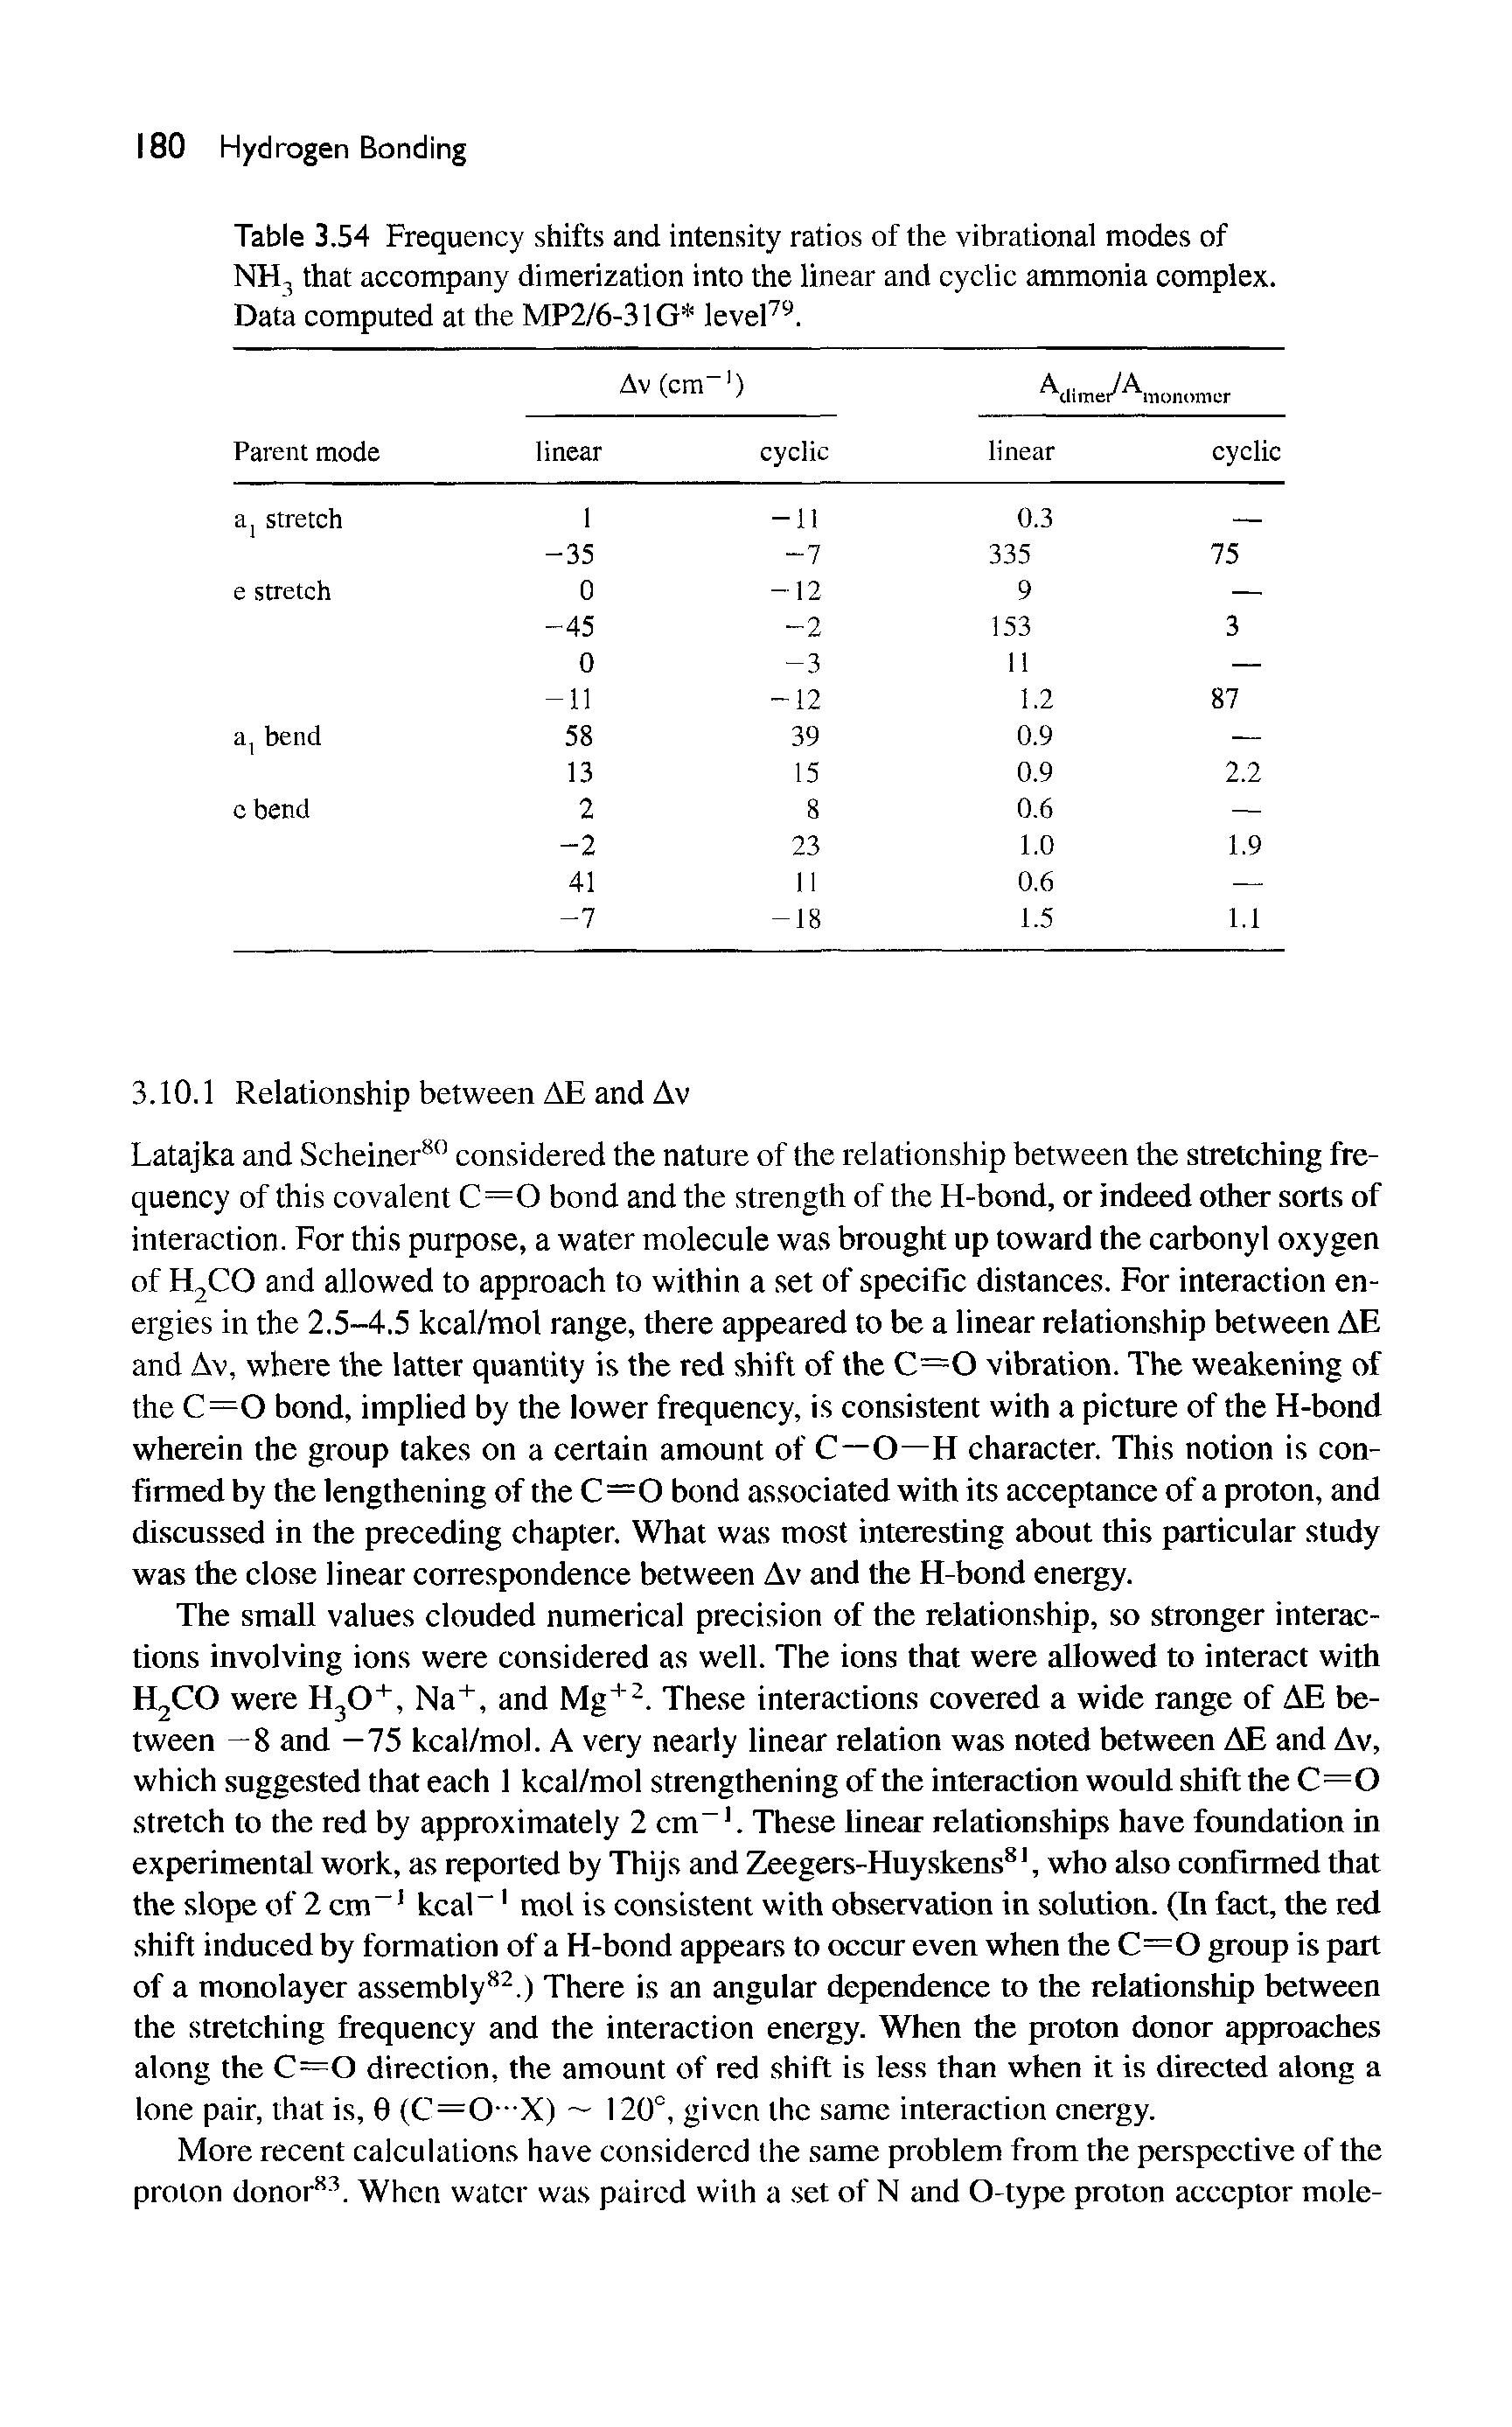 Table 3.54 Frequency shifts and intensity ratios of the vibrational modes of NH3 that accompany dimerization into the linear and cyclic ammonia complex. Data computed at the MP2/6-.31G leveP -. ...